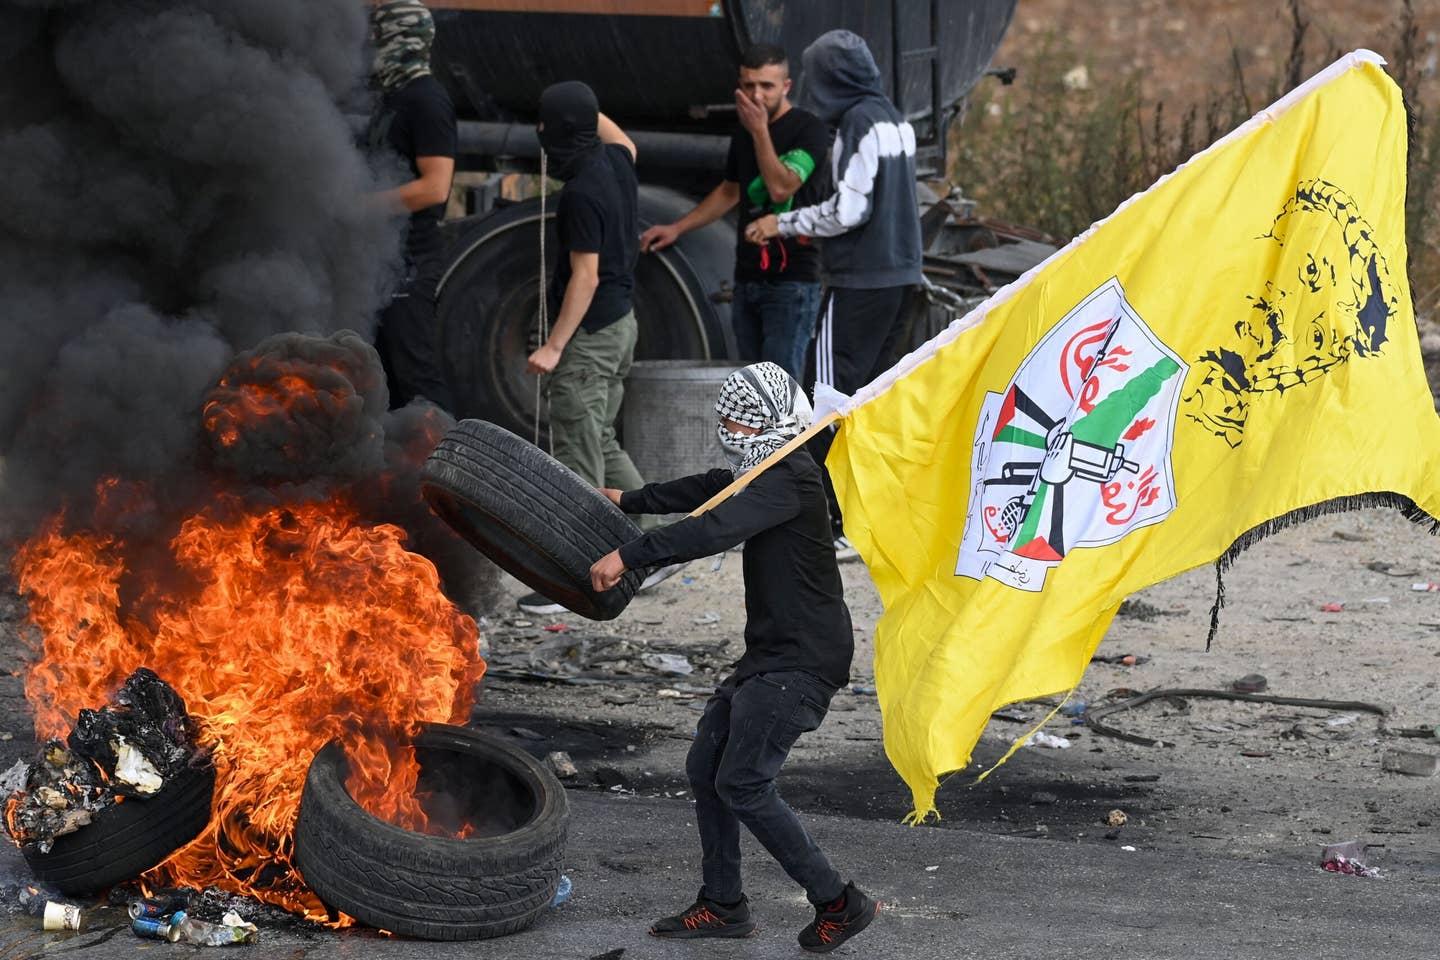 Palestinian youths burn tyres during clashes with Israeli security forces in the occupied West Bank city of Ramallah on October 20, 2023, amid ongoing battles between Israel and Hamas militants. (Photo by YURI CORTEZ / AFP) (Photo by YURI CORTEZ/AFP via Getty Images)